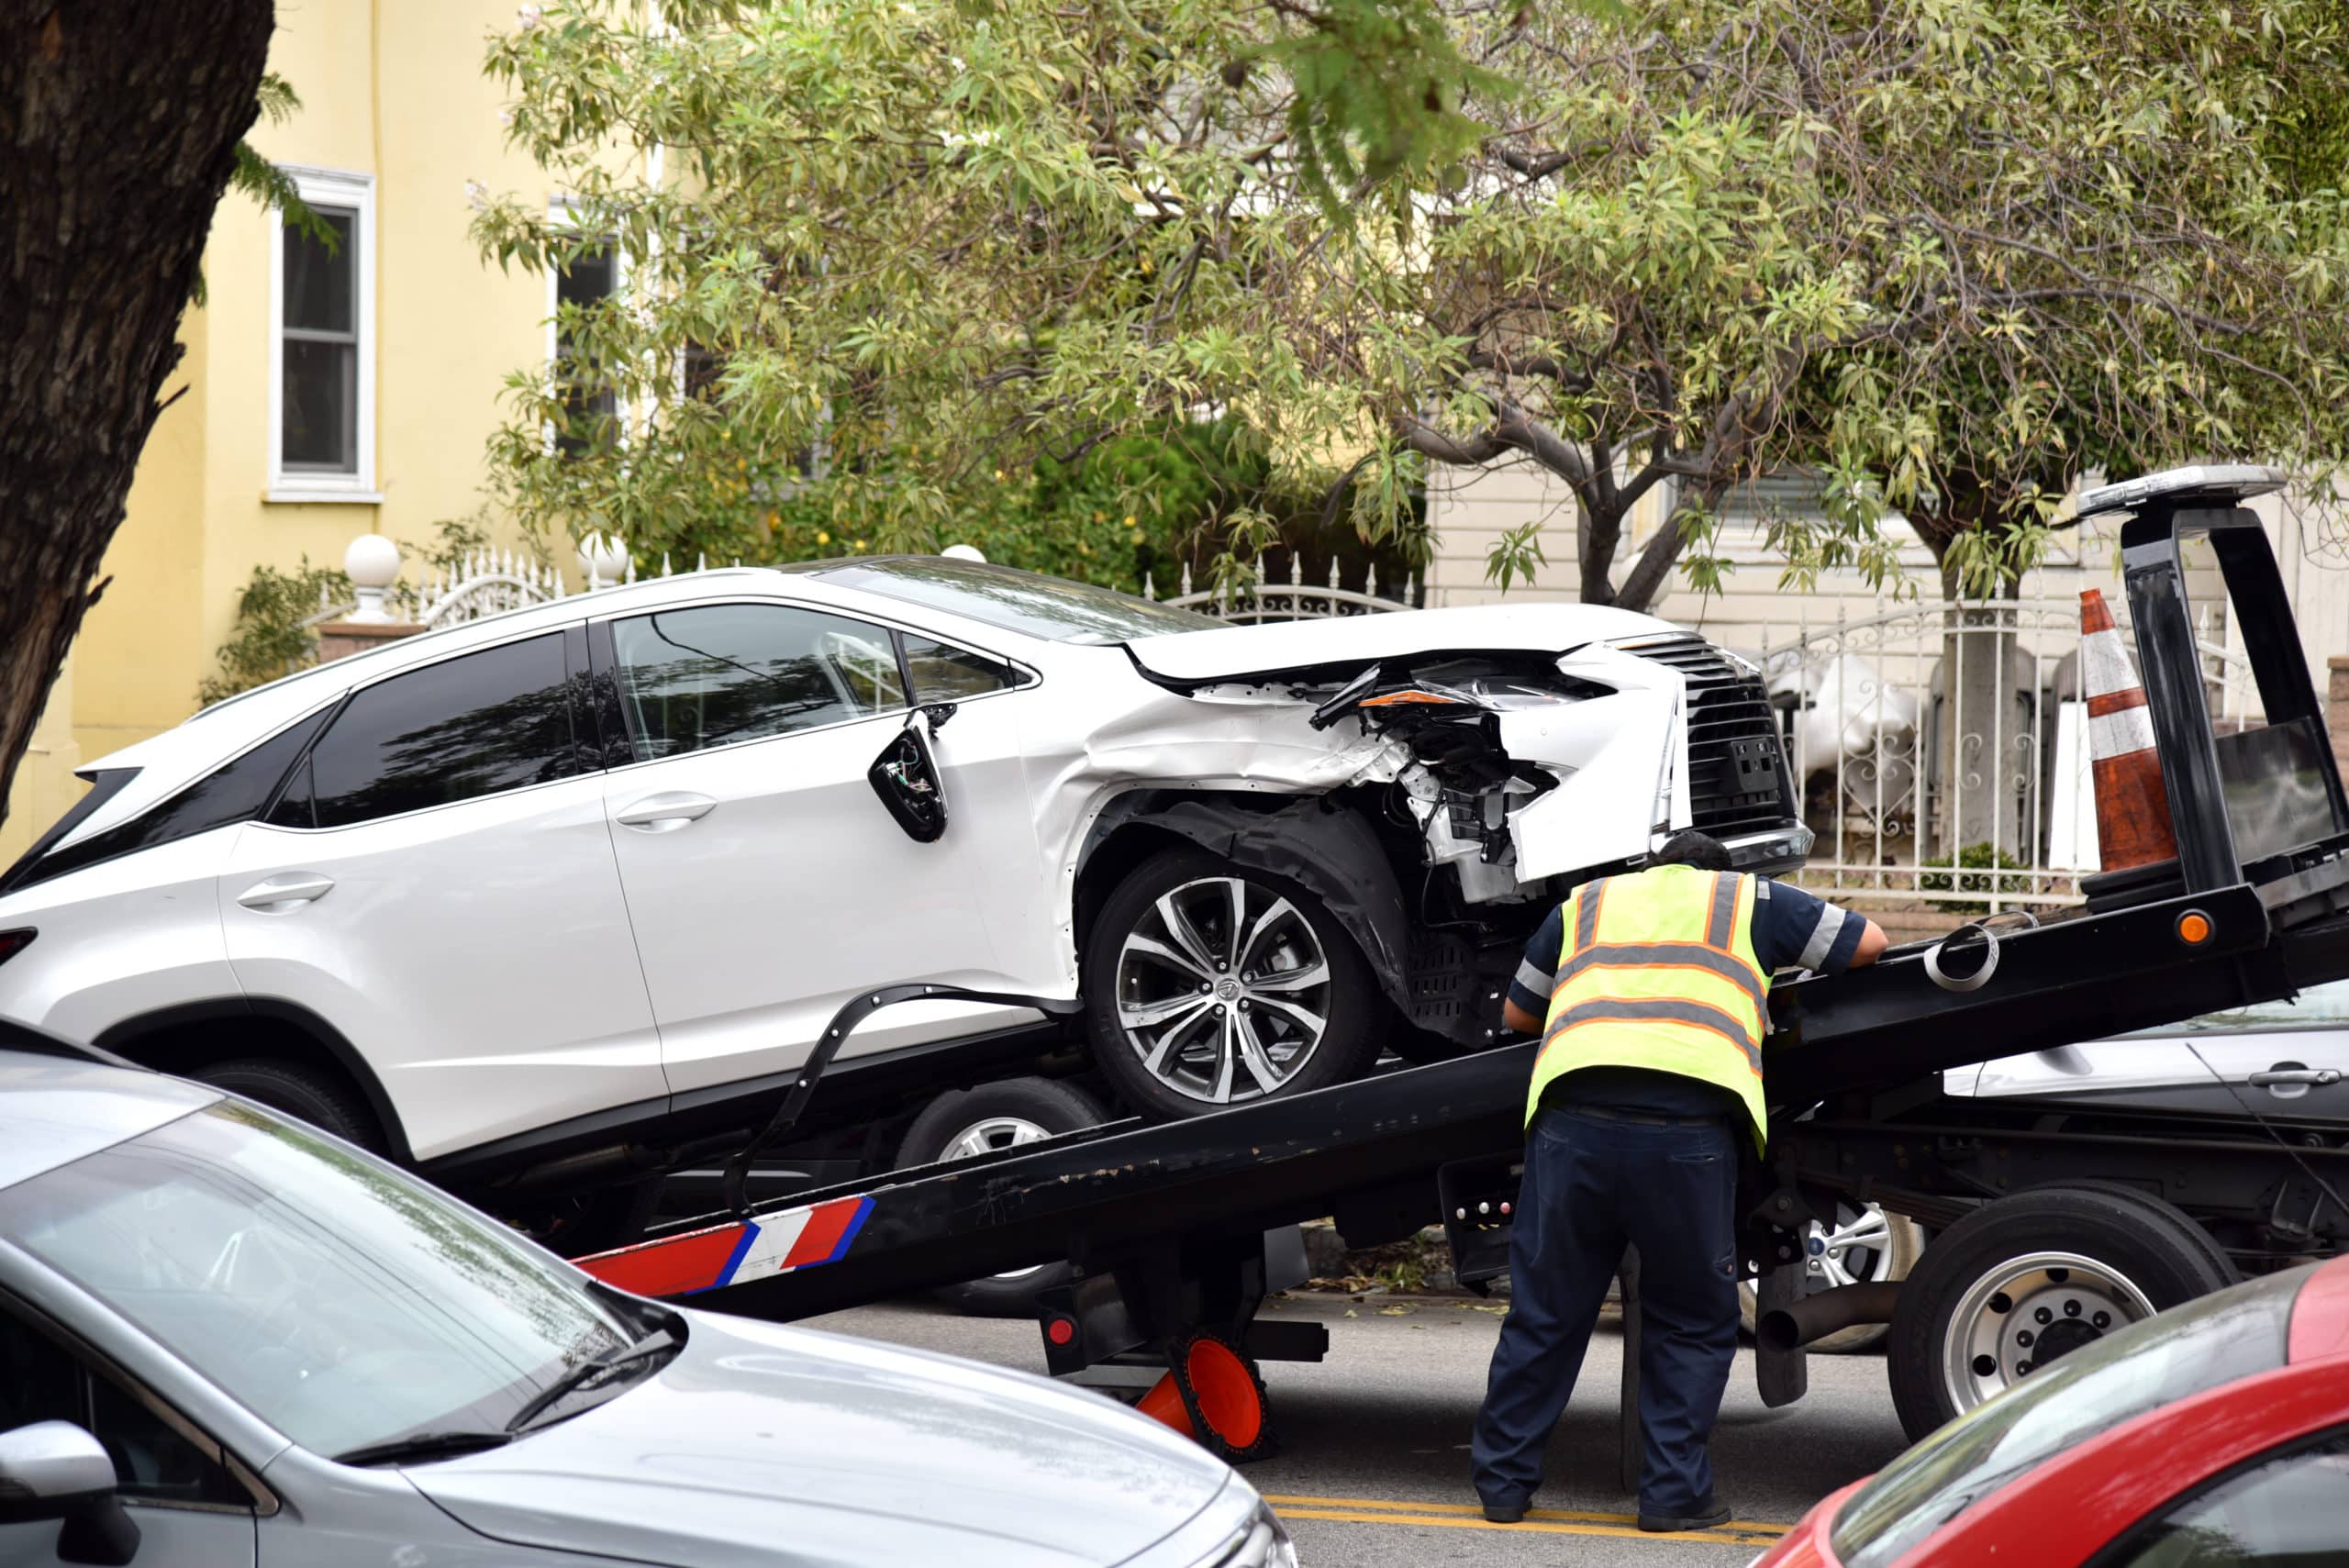 A car with personal possessions inside being towed away after serious accident in Corpus Christi.